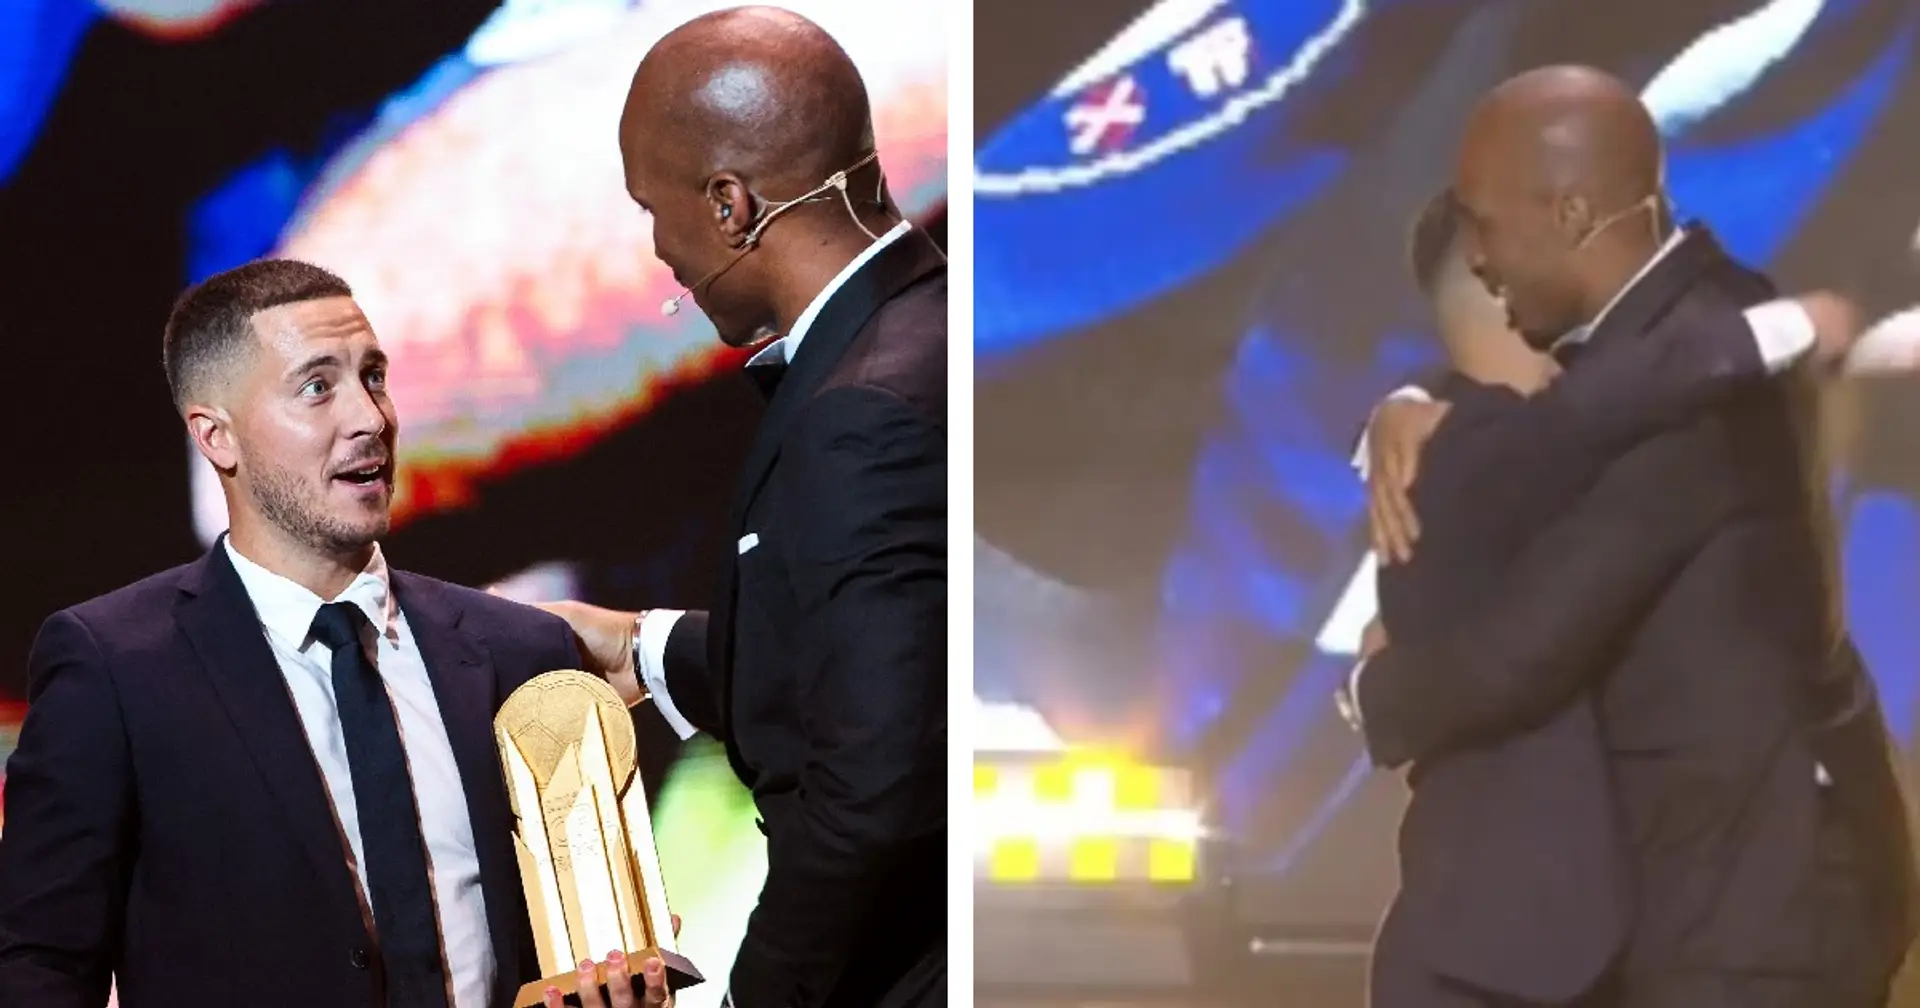 'Someone de-age these two back to 25': Fans react as Drogba and Hazard embrace at Ballon d'Or ceremony